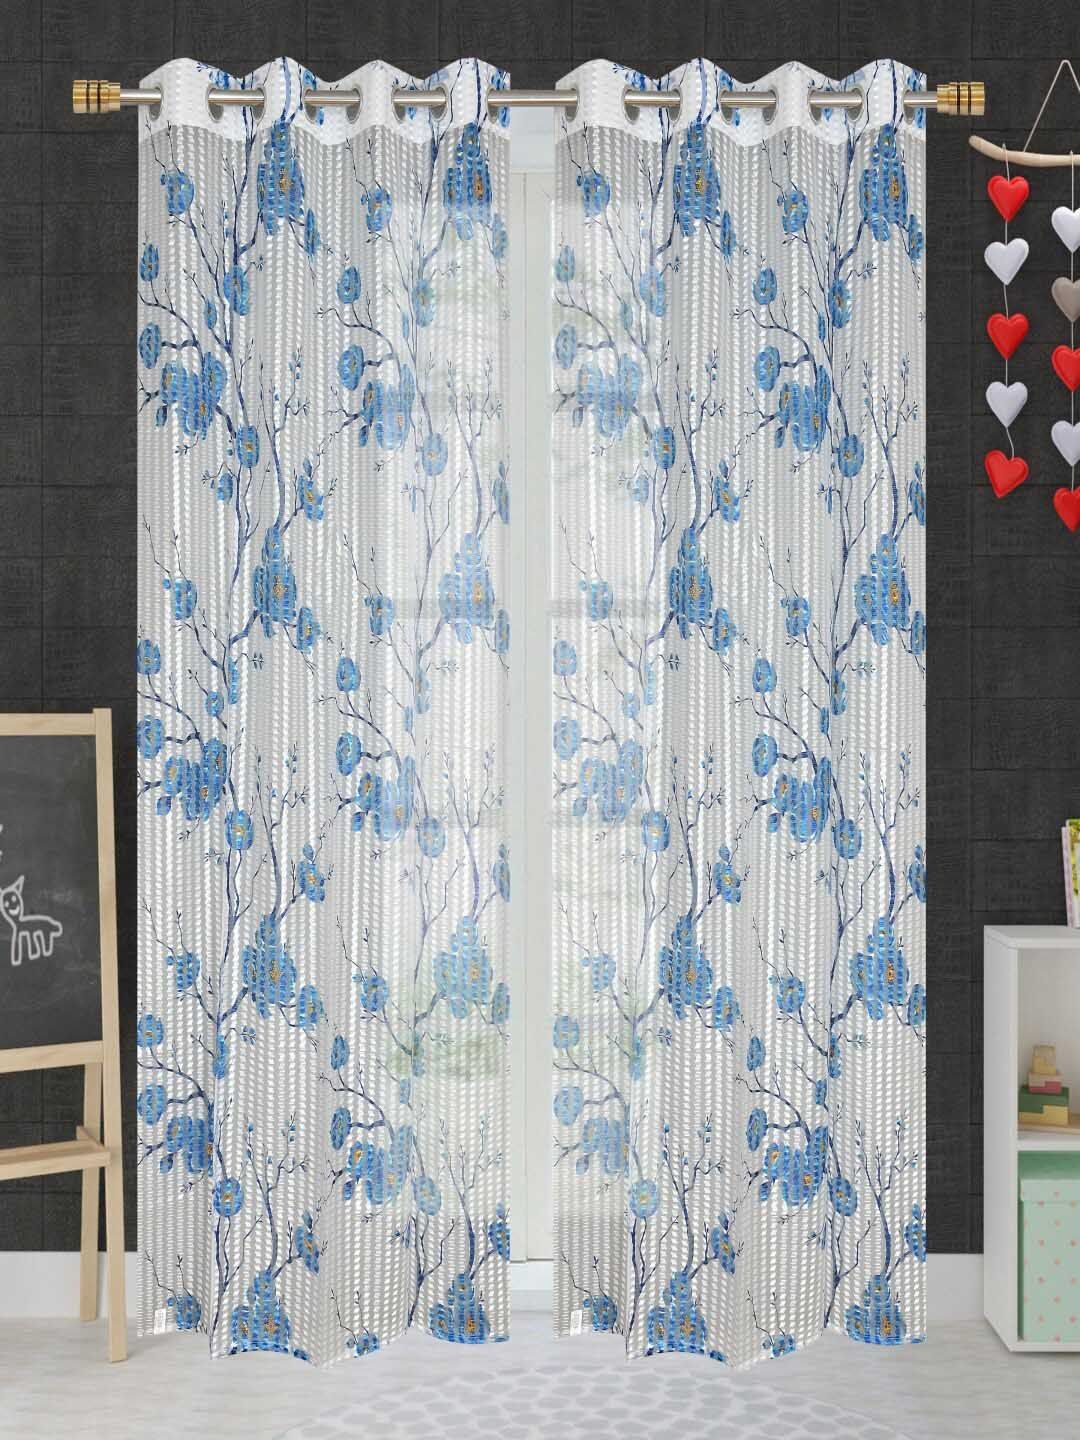 Homefab India Unisex Blue Curtains and Sheers Price in India